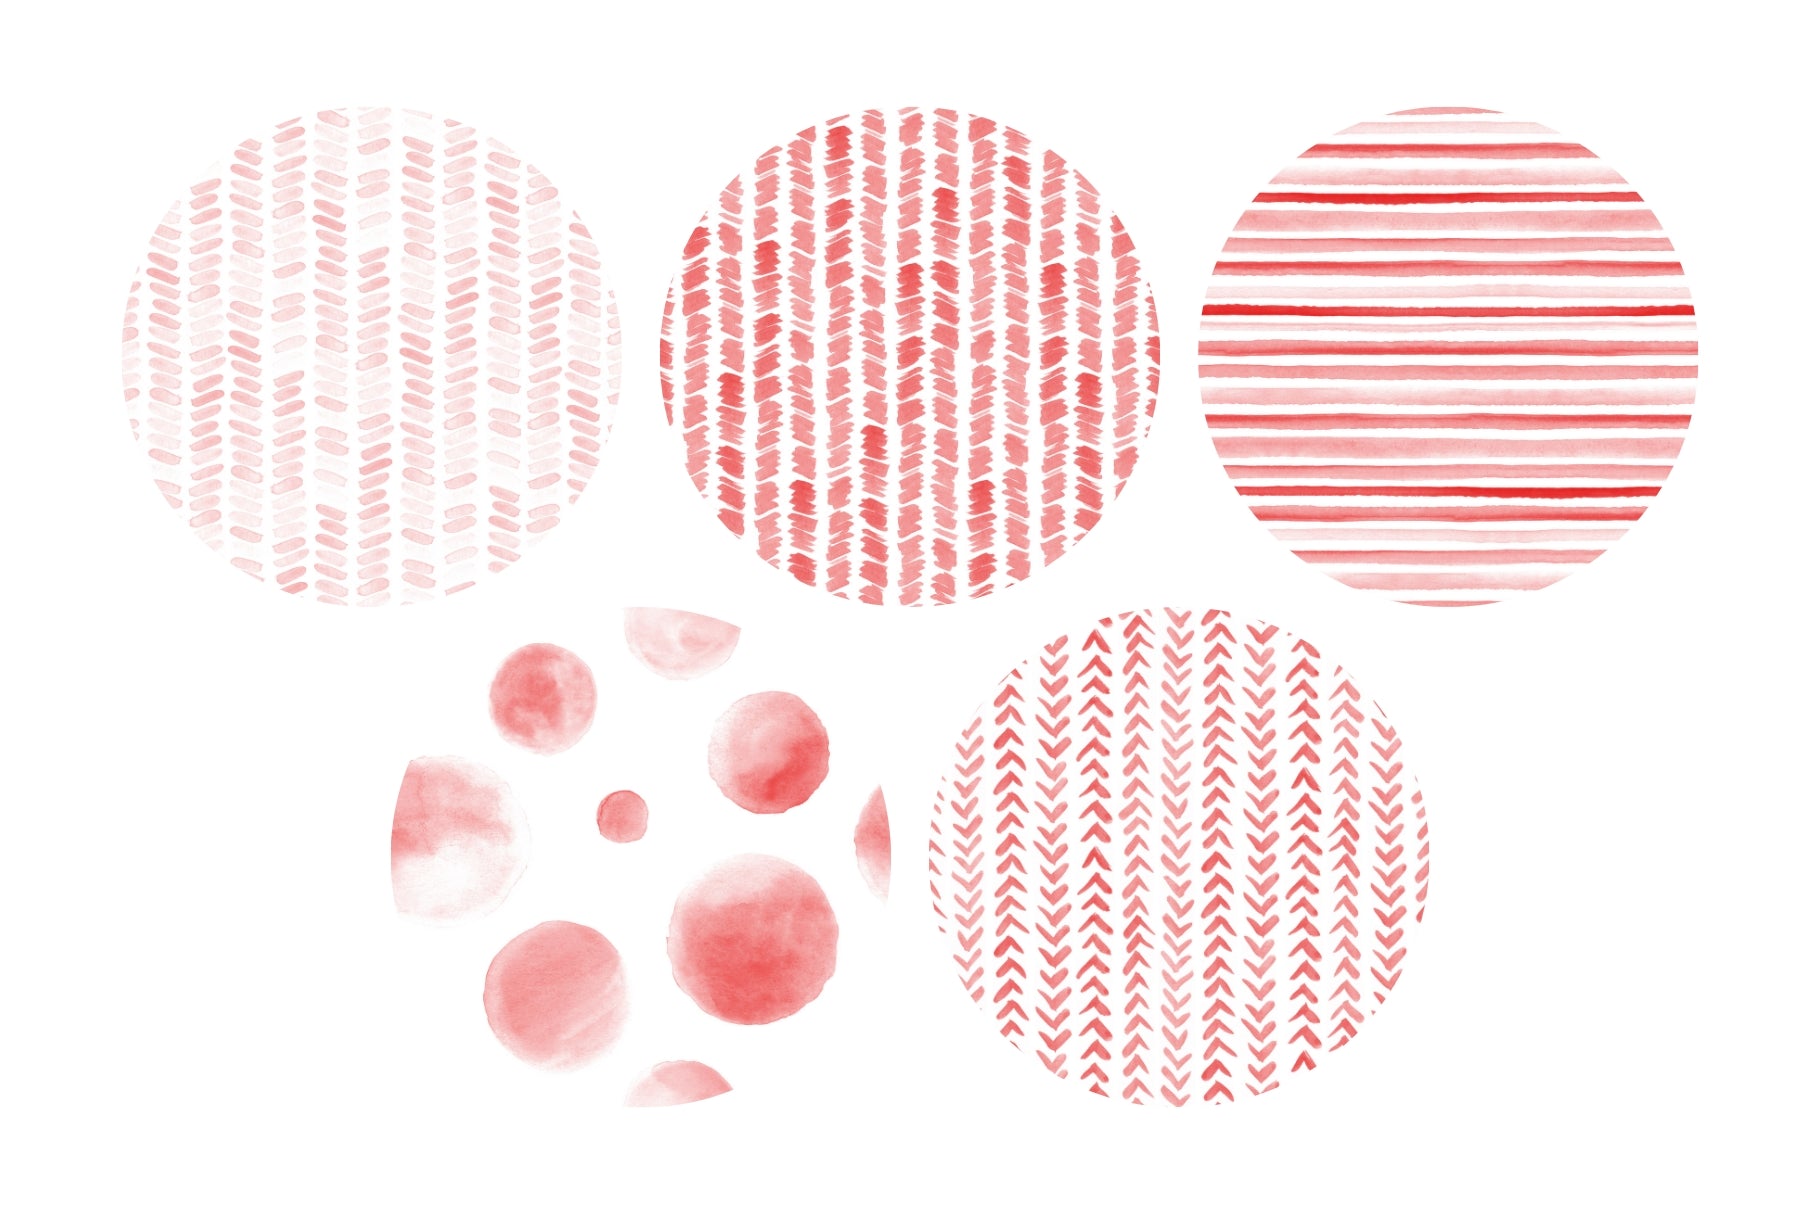 Watercolor Patterns 01 Red Watercolor Seamless Patterns